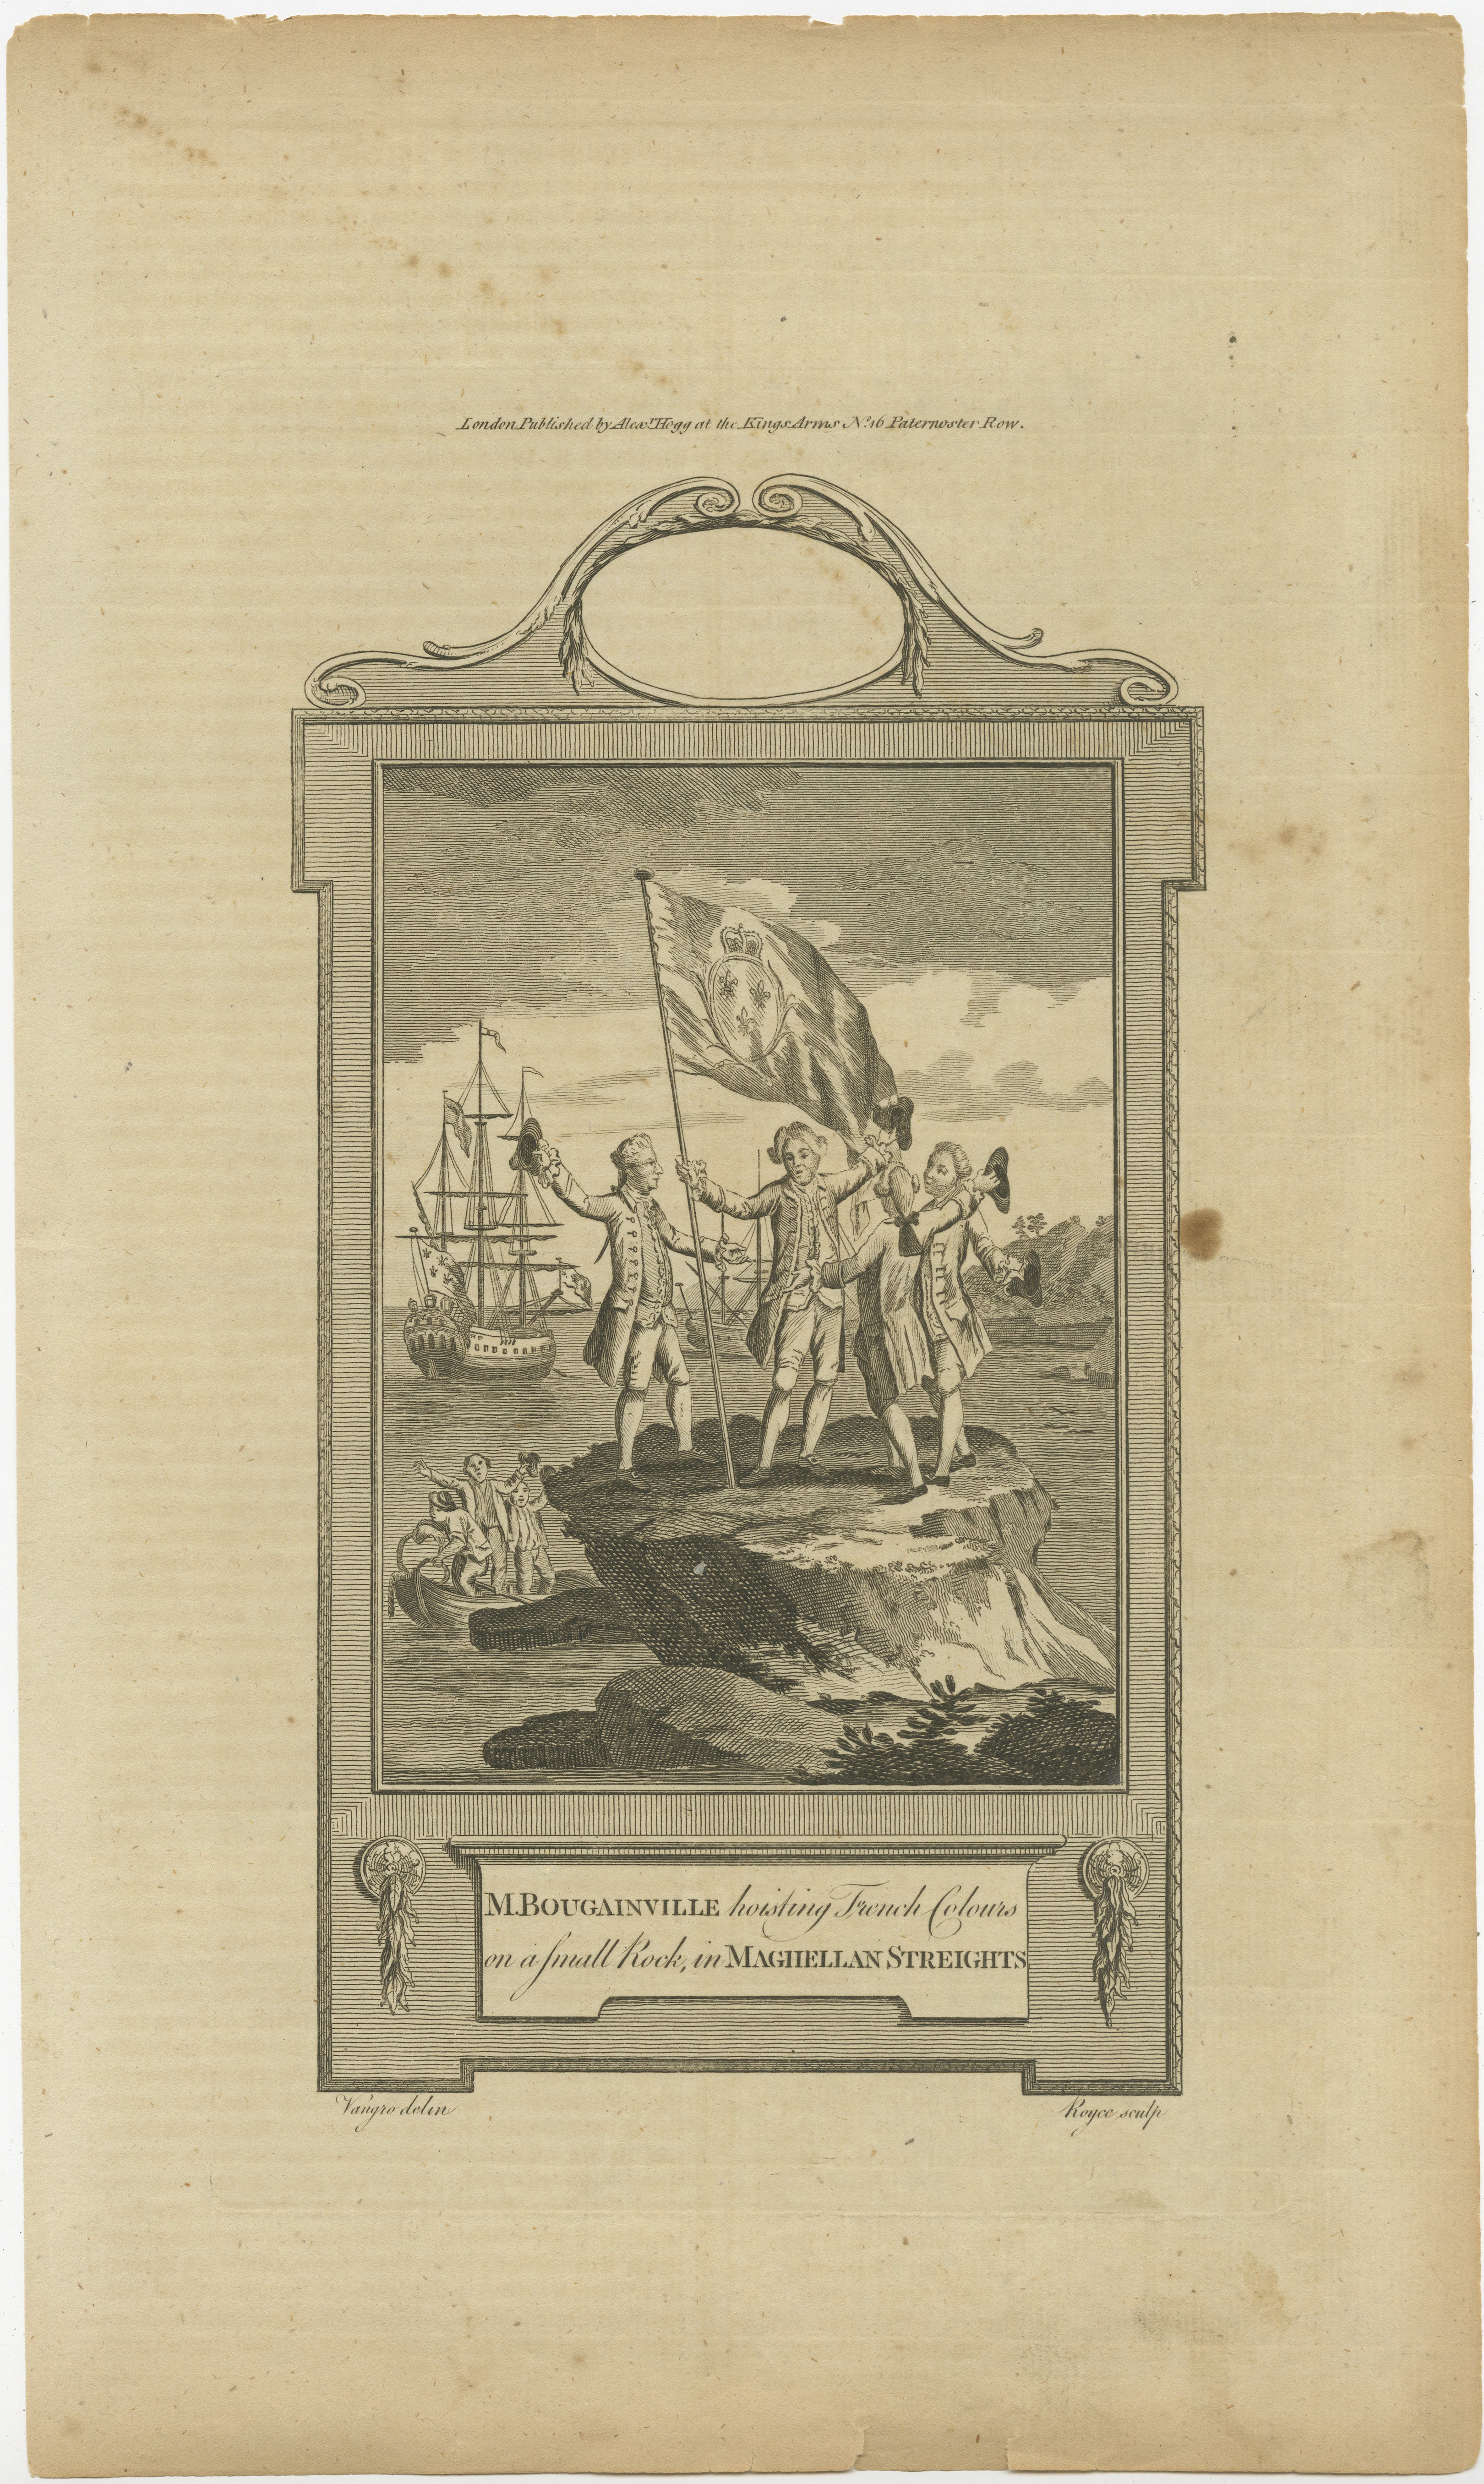 The engraving depicts the French explorer Louis Antoine de Bougainville hoisting the French colors upon a small rock in the Magellan Straits. This act symbolizes the claiming of territory during his expedition, which took place between 1766 and